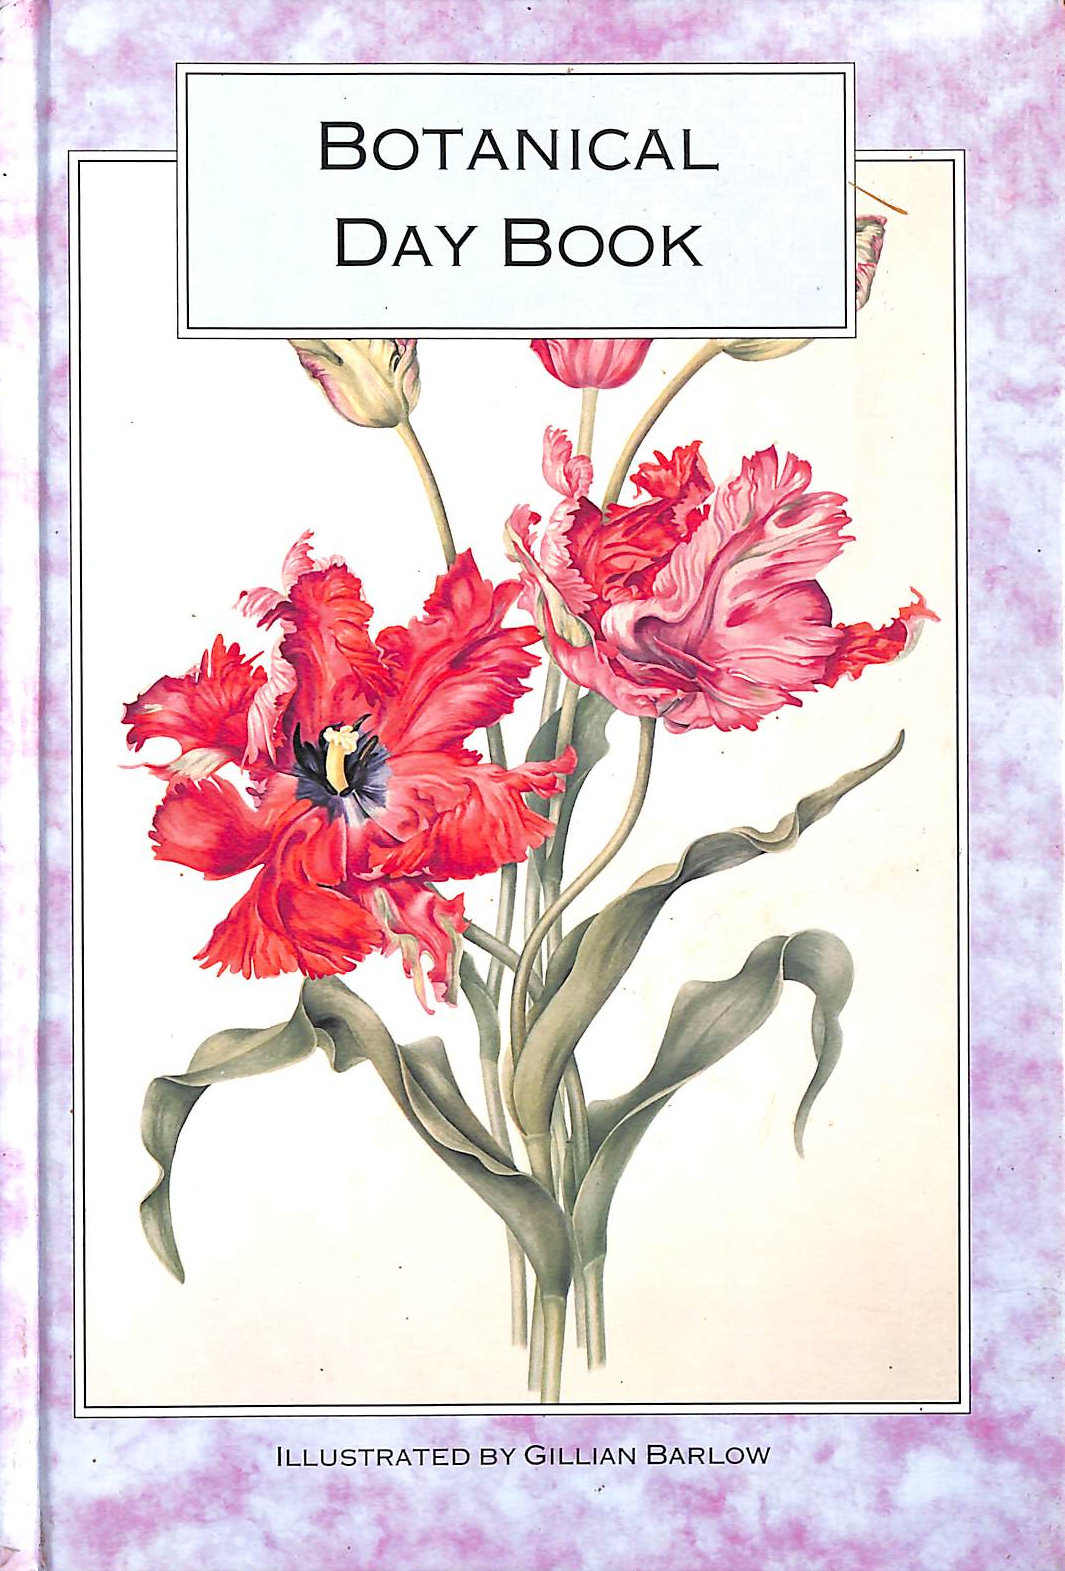 UNKNOWN - Botanical Day Book